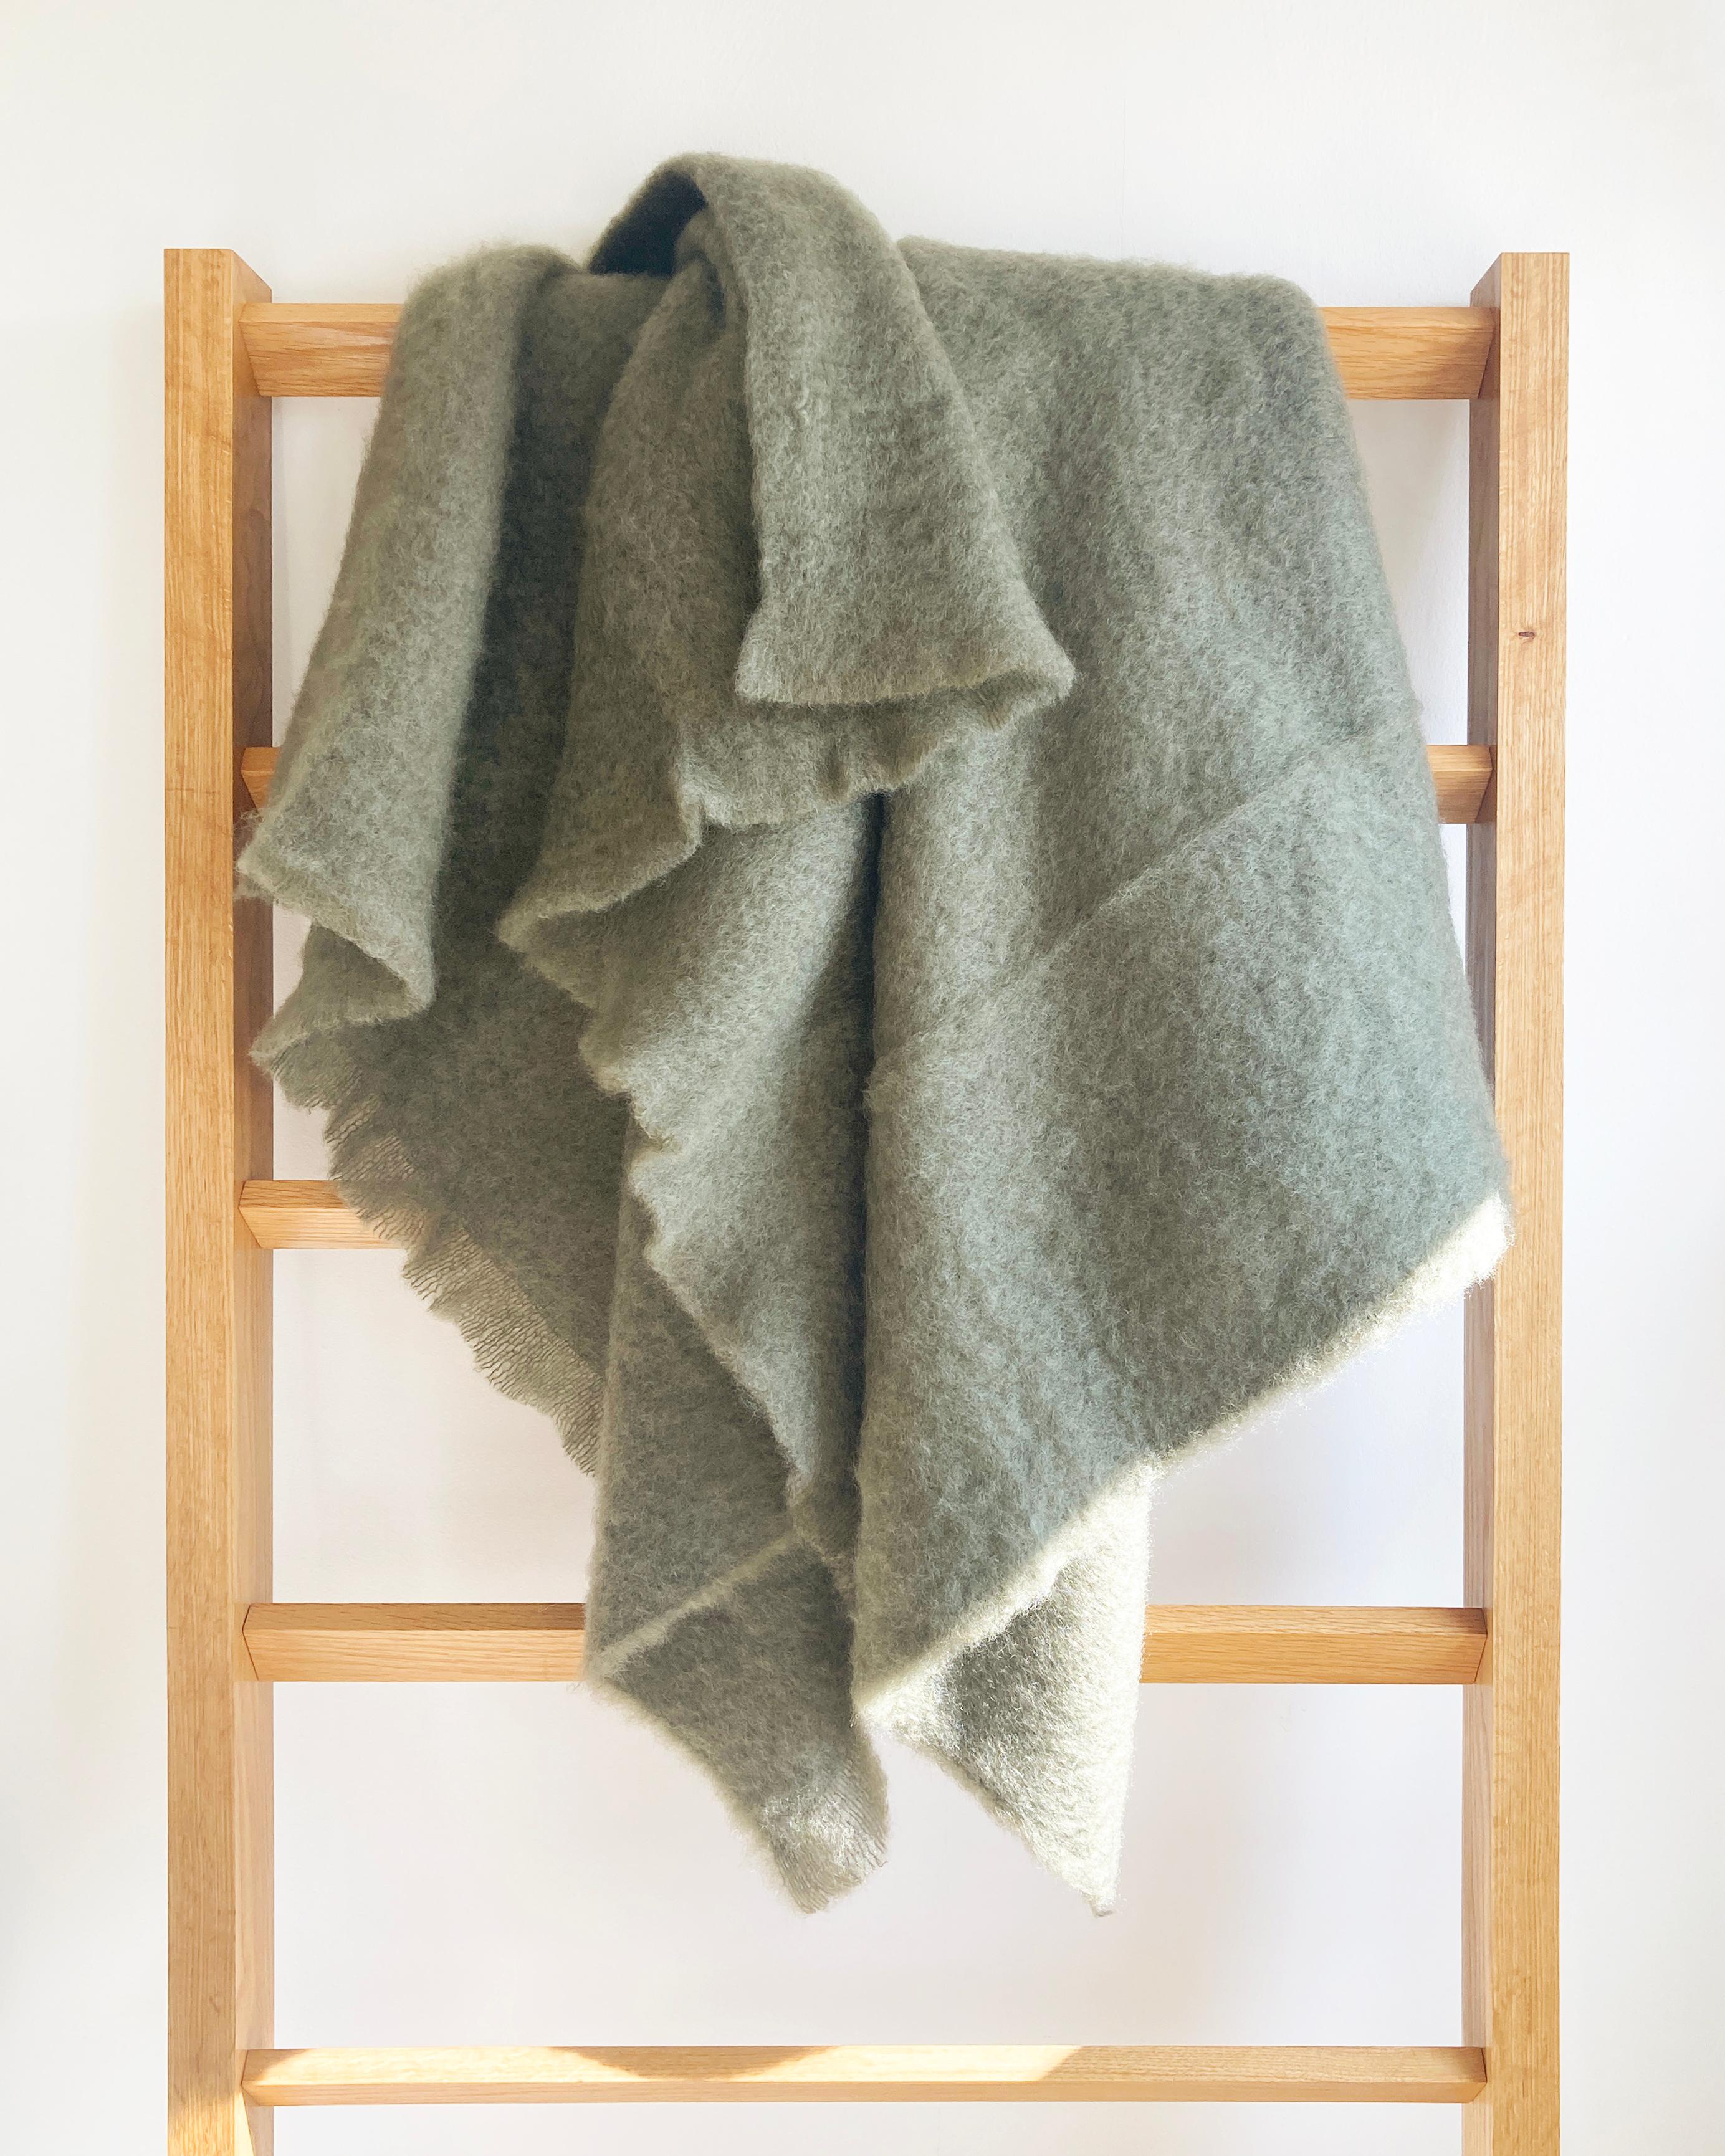 Cozy throw blankets for your home.

Mohair blankets will keep you cozy and warm this winter. When cold weather happens, wrap yourself up in this beautiful Moss green Mohair Throw and stay cozy. This understated green color will light up the room and